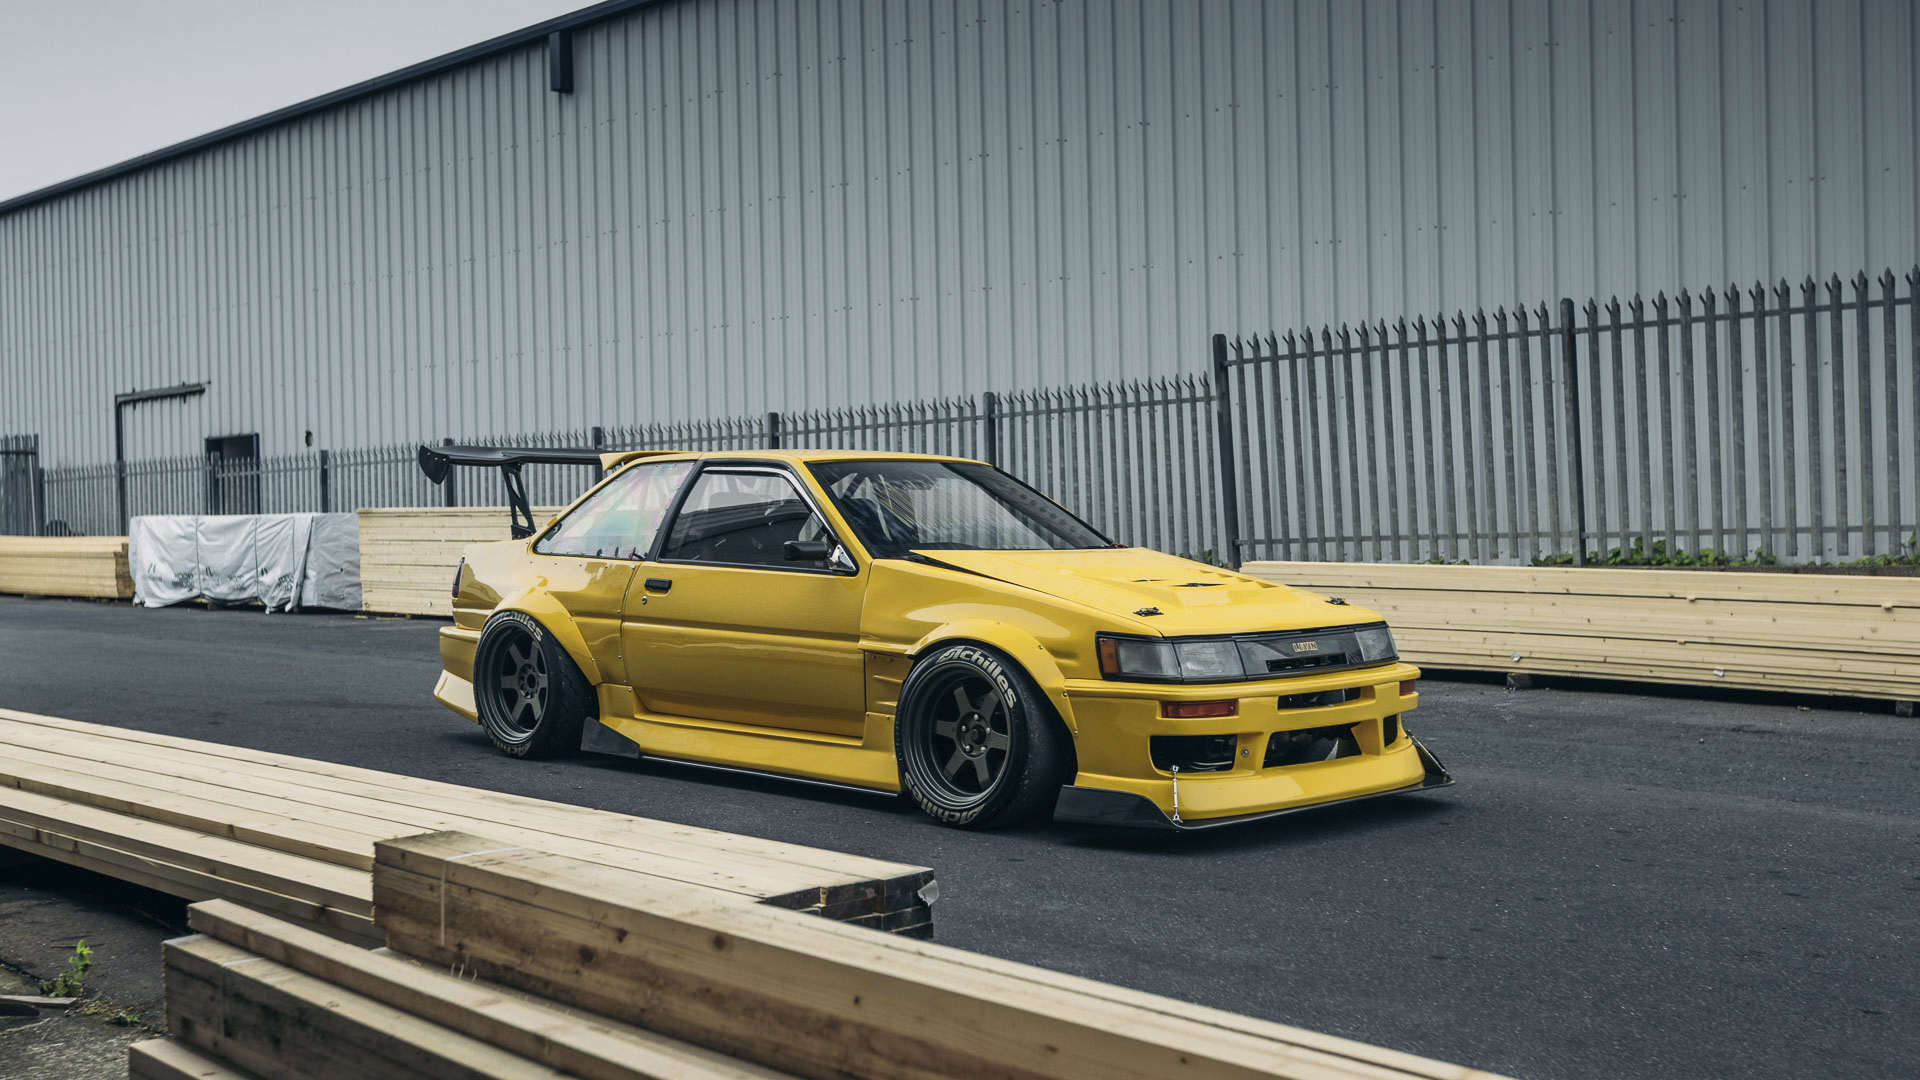 General 1920x1080 Toyota Toyota AE86 car yellow cars vehicle frontal view bodykit Japanese cars car spoiler